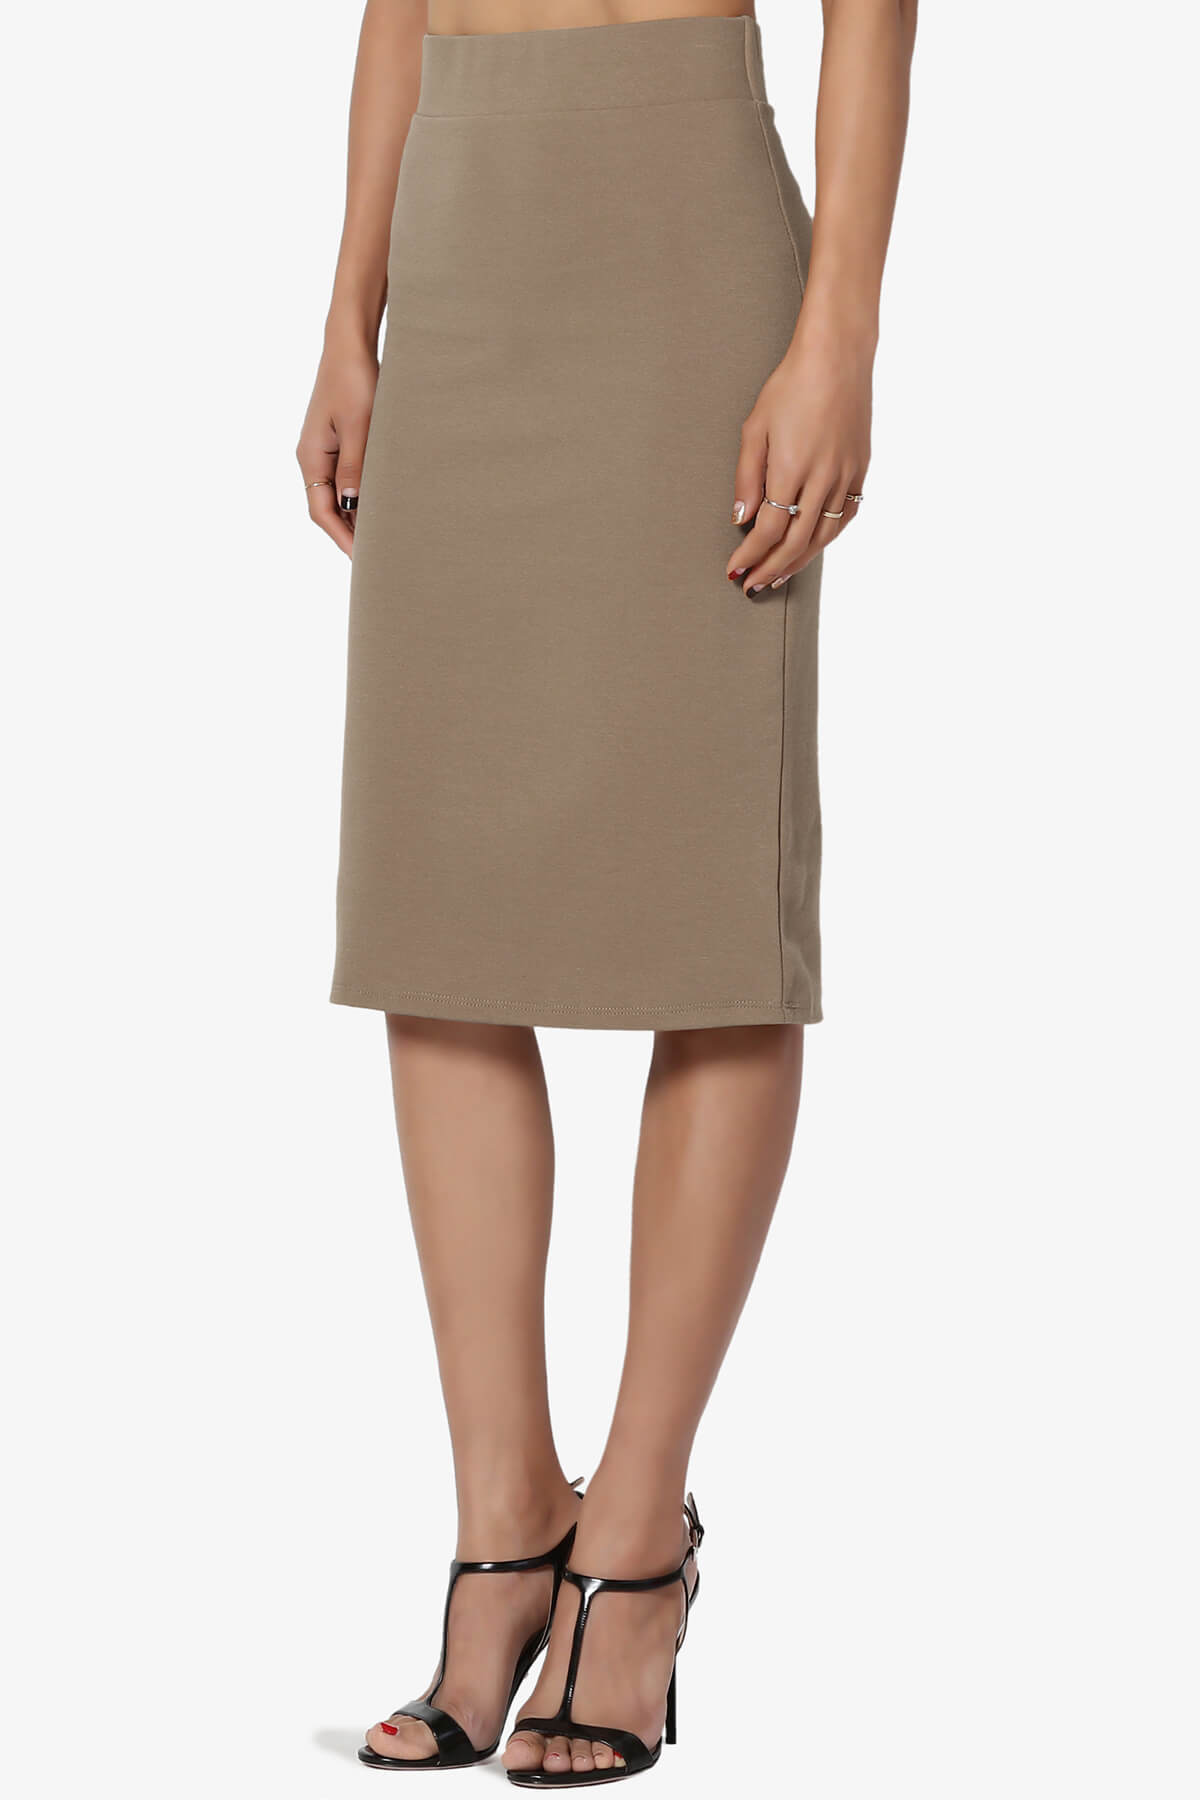 Ponte Pencil Skirt in Golden Ochre- Misses and Plus (S-2X) – Darlin's  Modest Wear